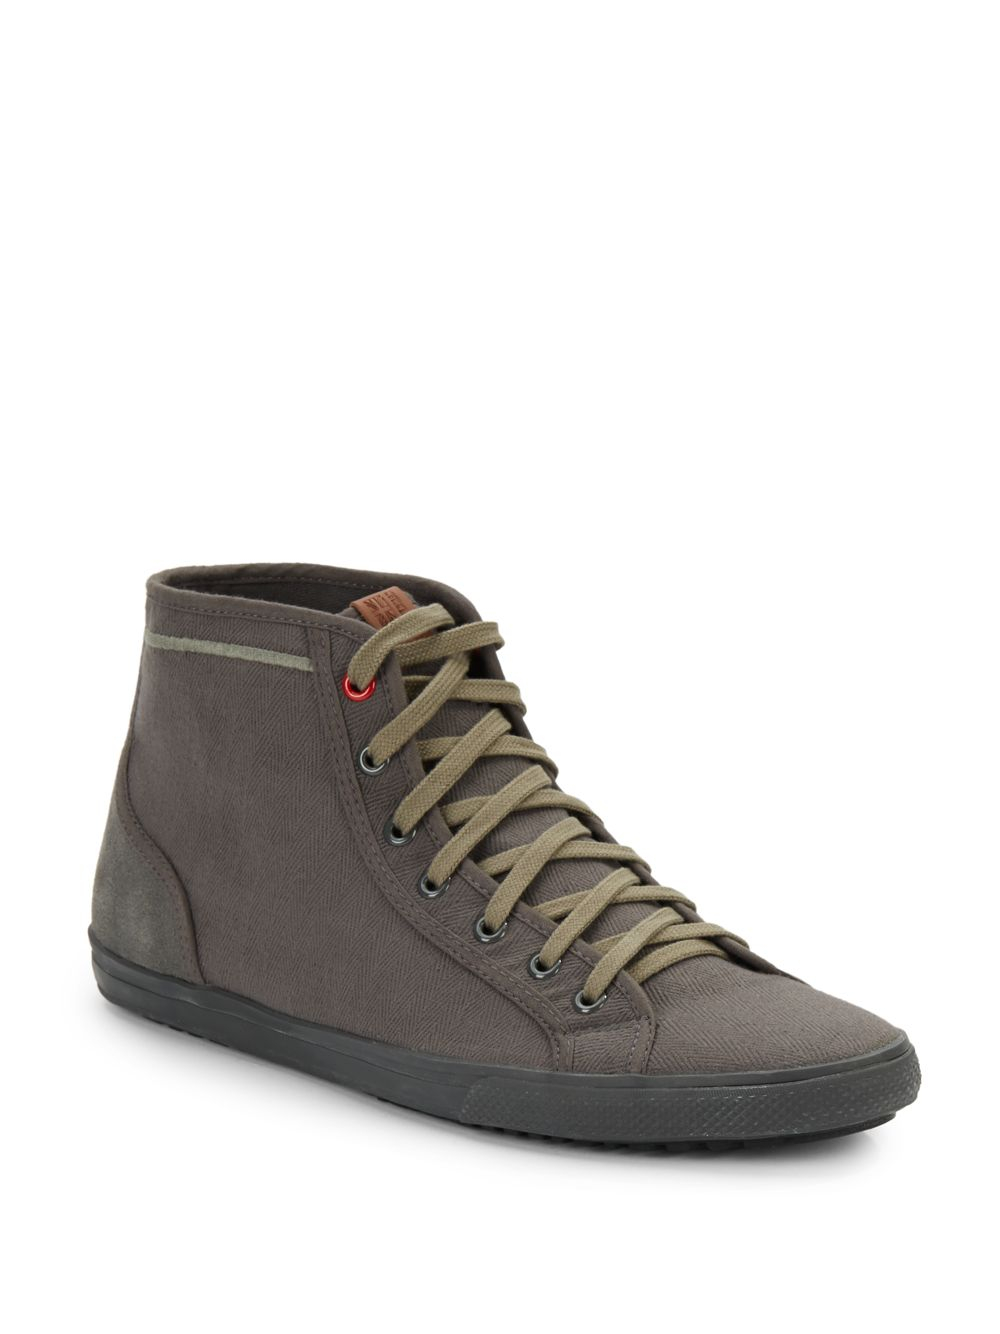 Ben Sherman Conall Leather-Trimmed Twill High-Top Sneakers in Grey ...